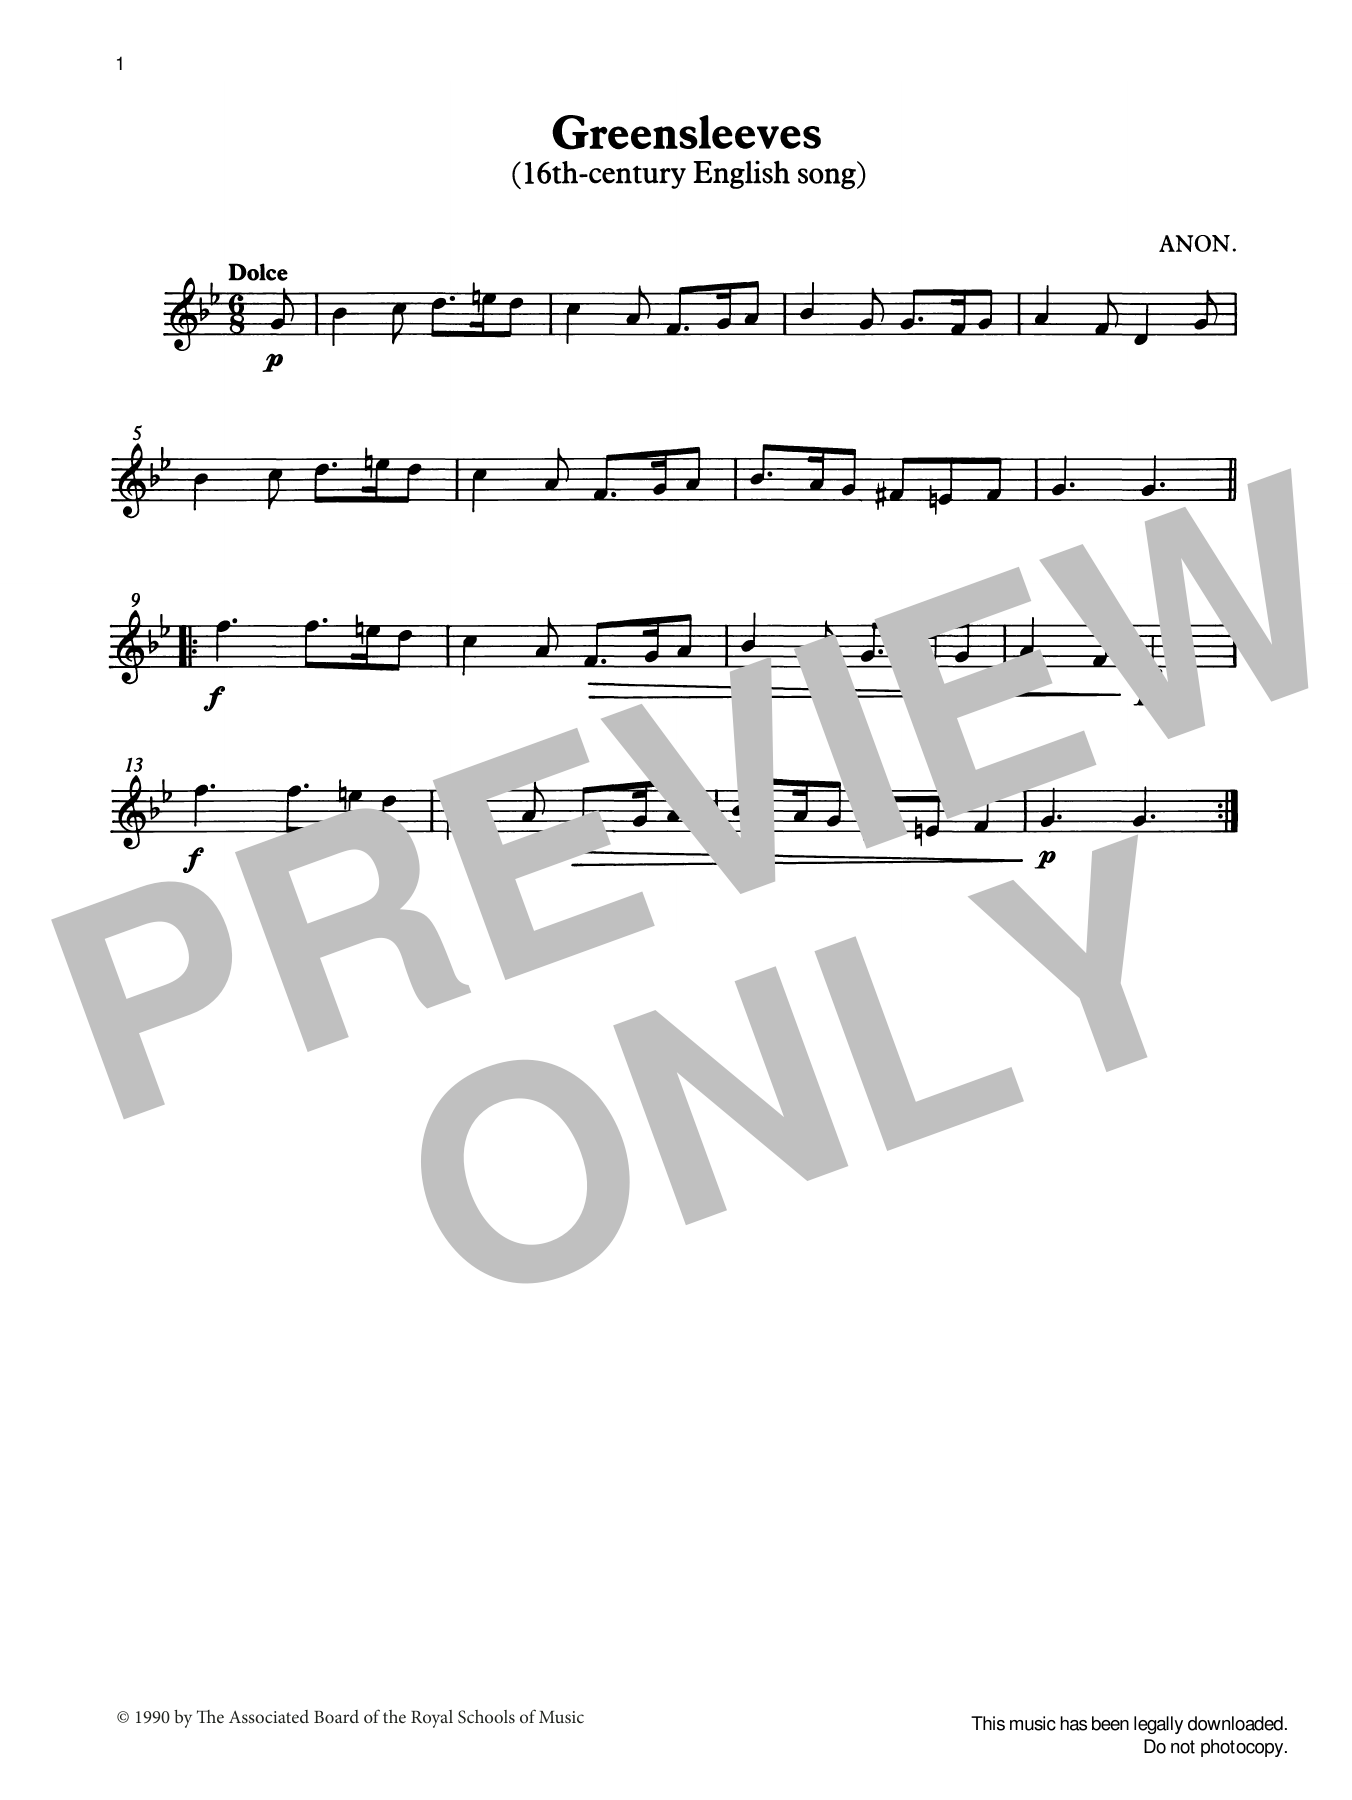 Download Trad. English Greensleeves from Graded Music for Tune Sheet Music